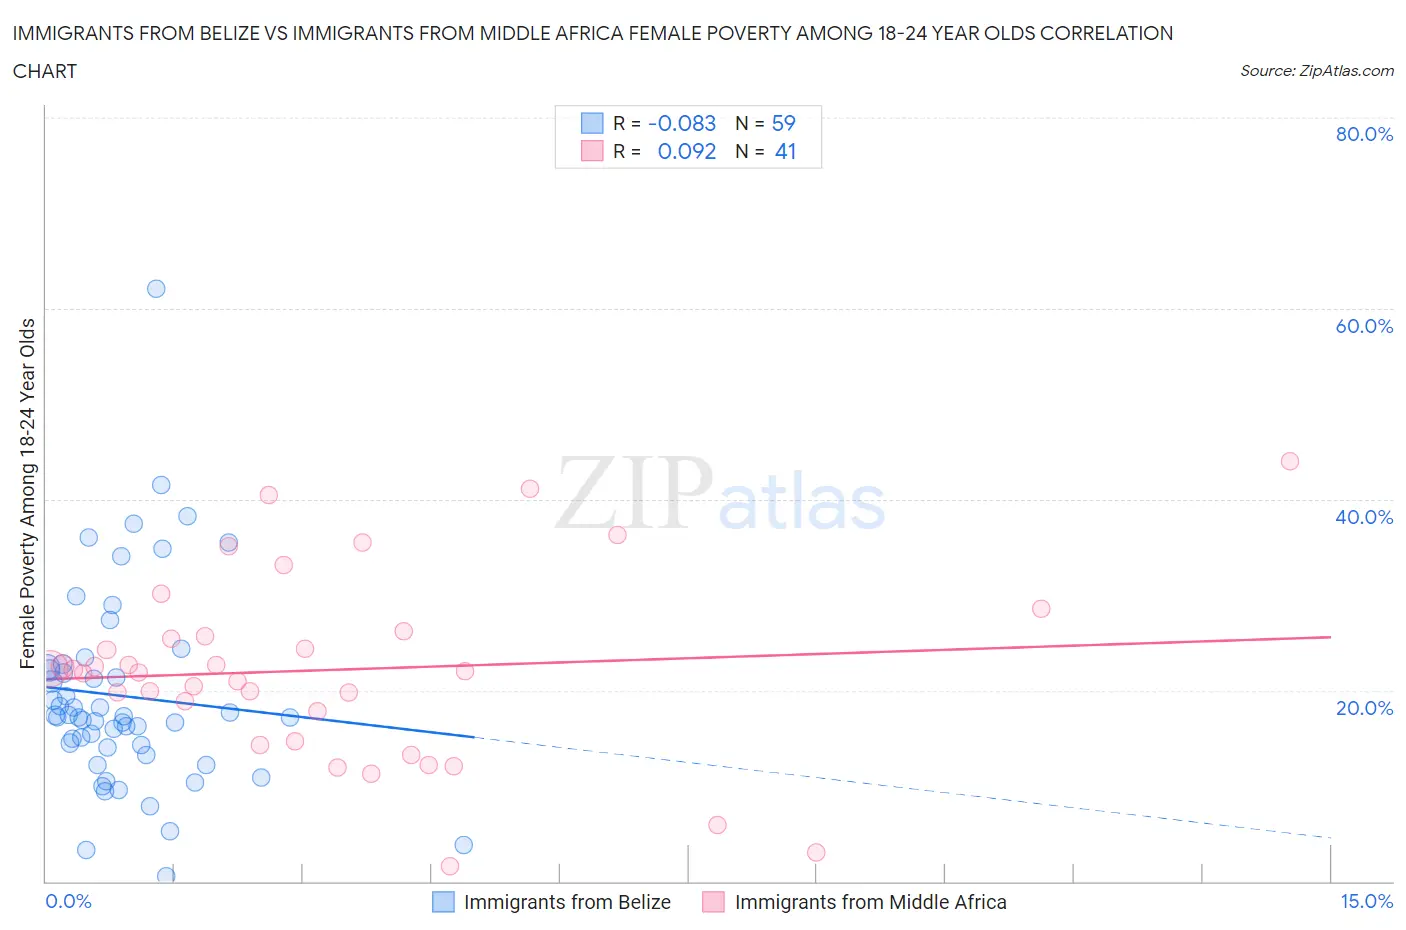 Immigrants from Belize vs Immigrants from Middle Africa Female Poverty Among 18-24 Year Olds